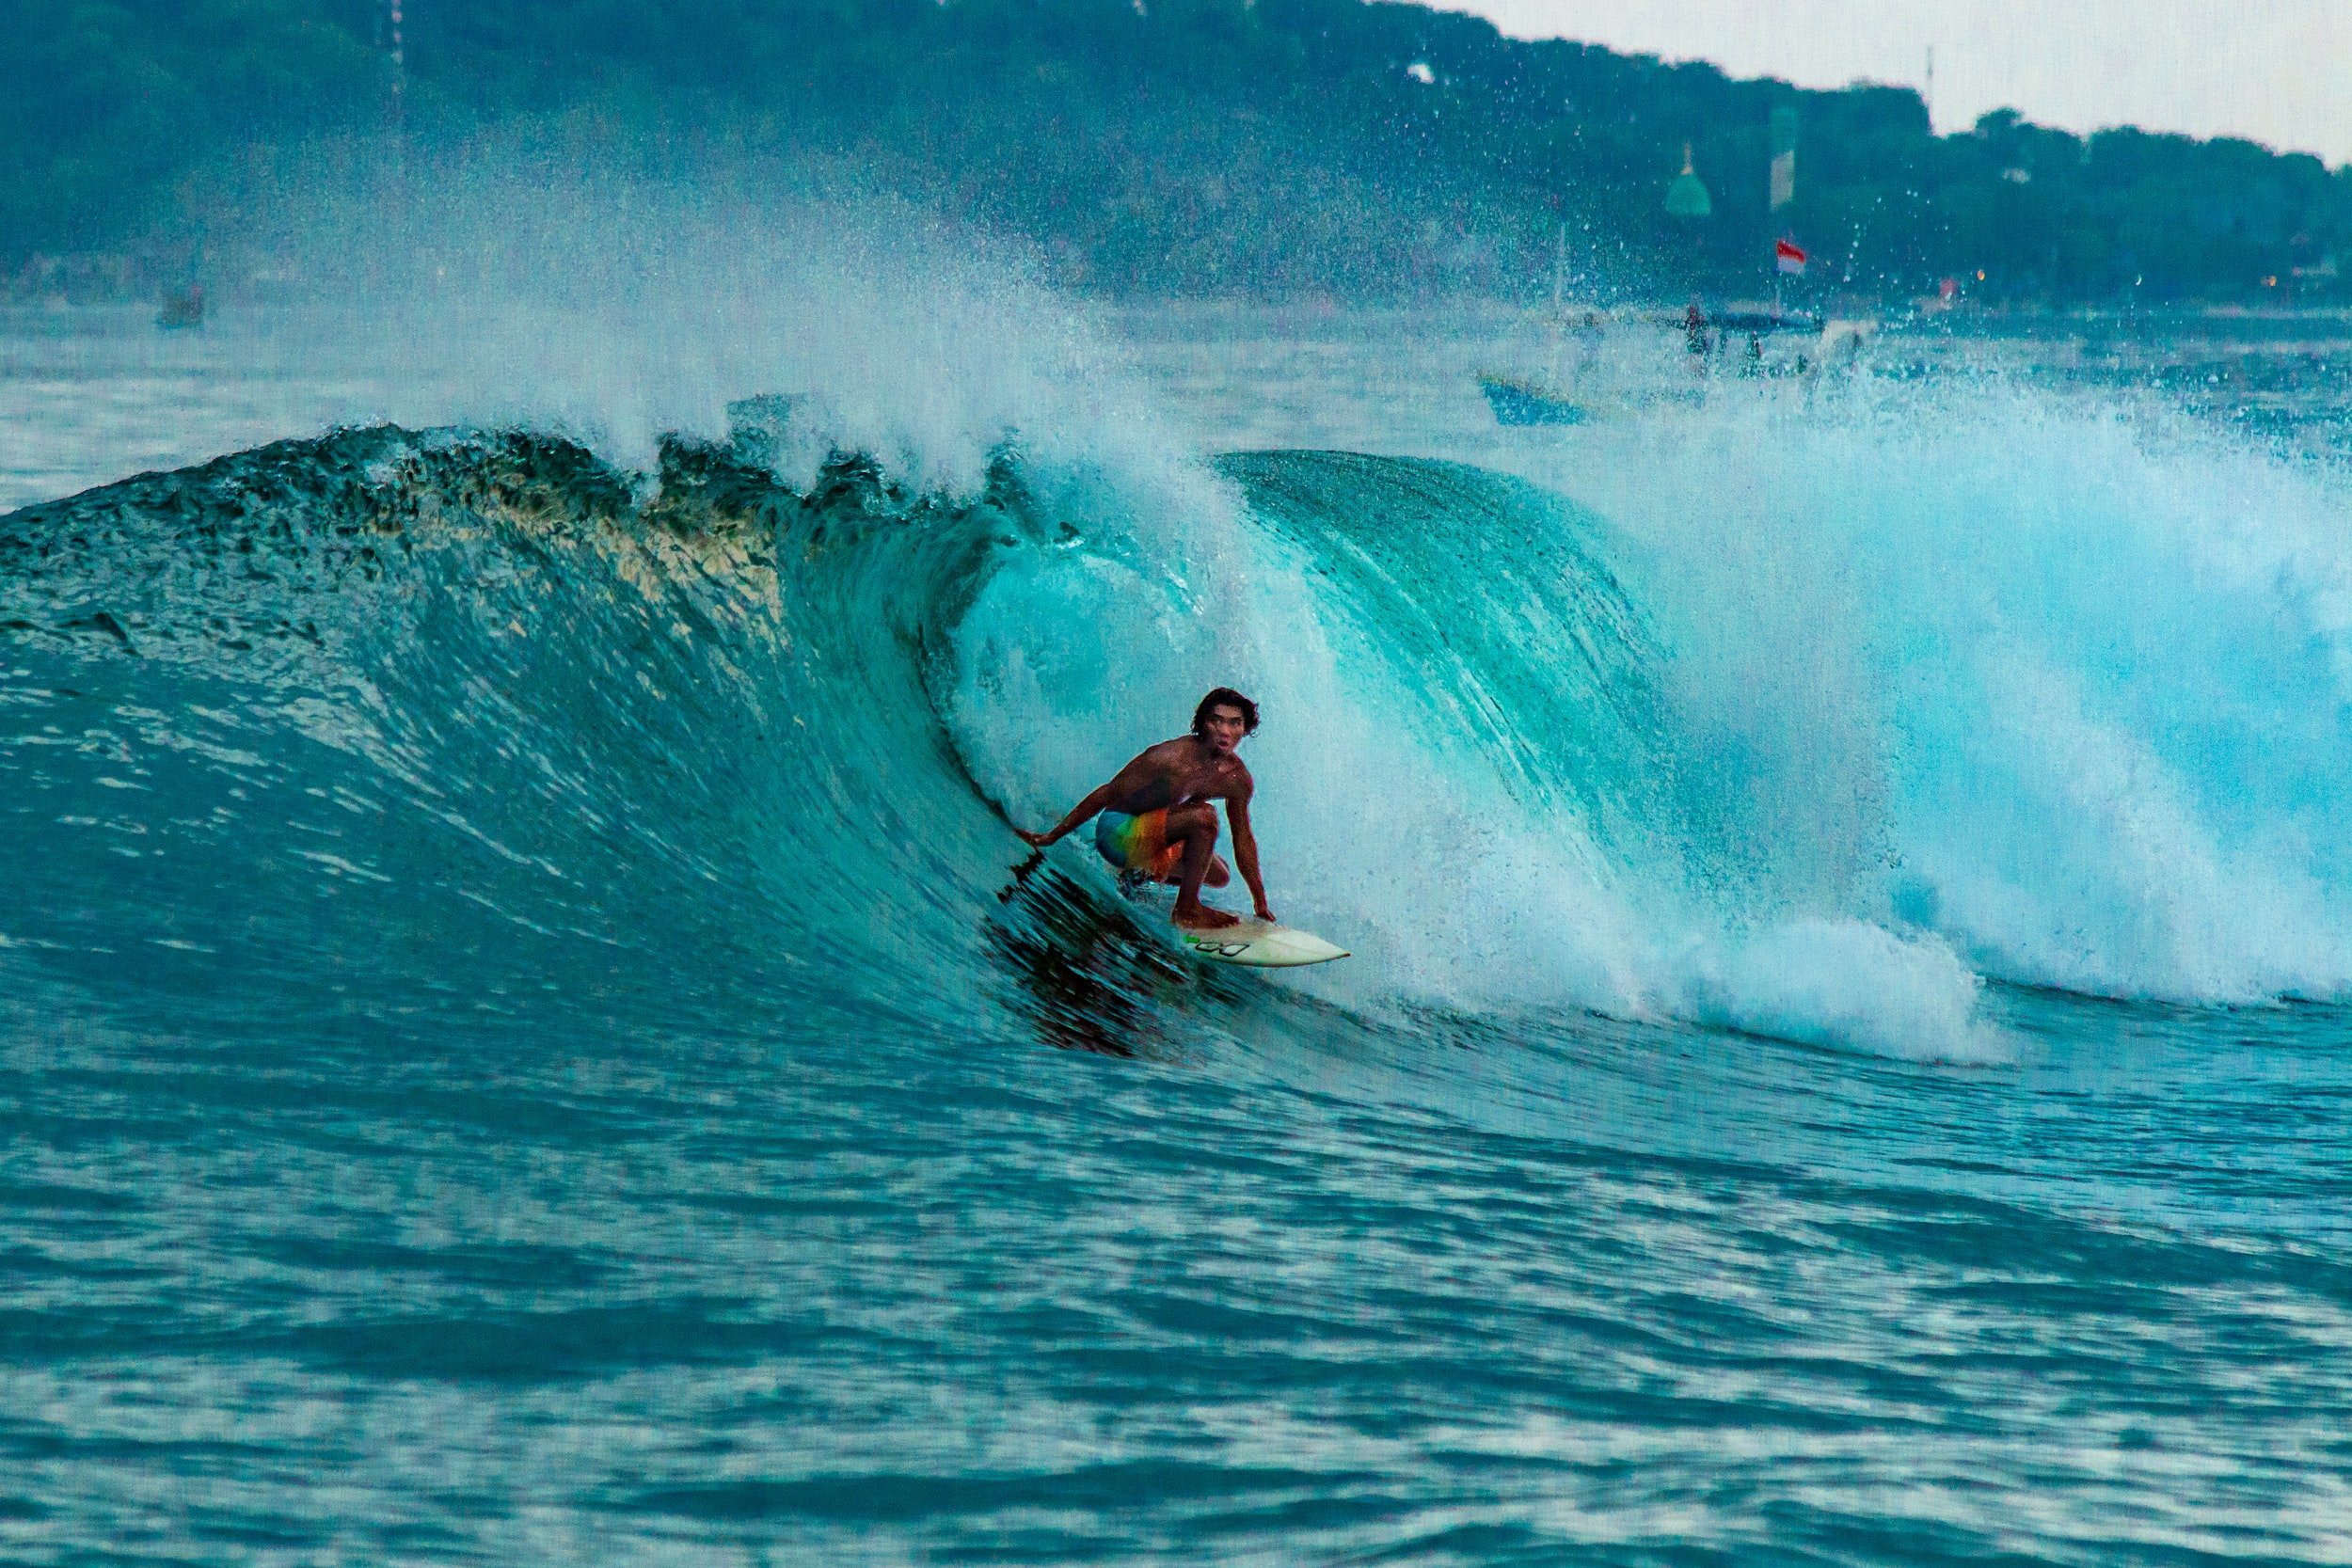 May is the best month to visit Bali for surfing